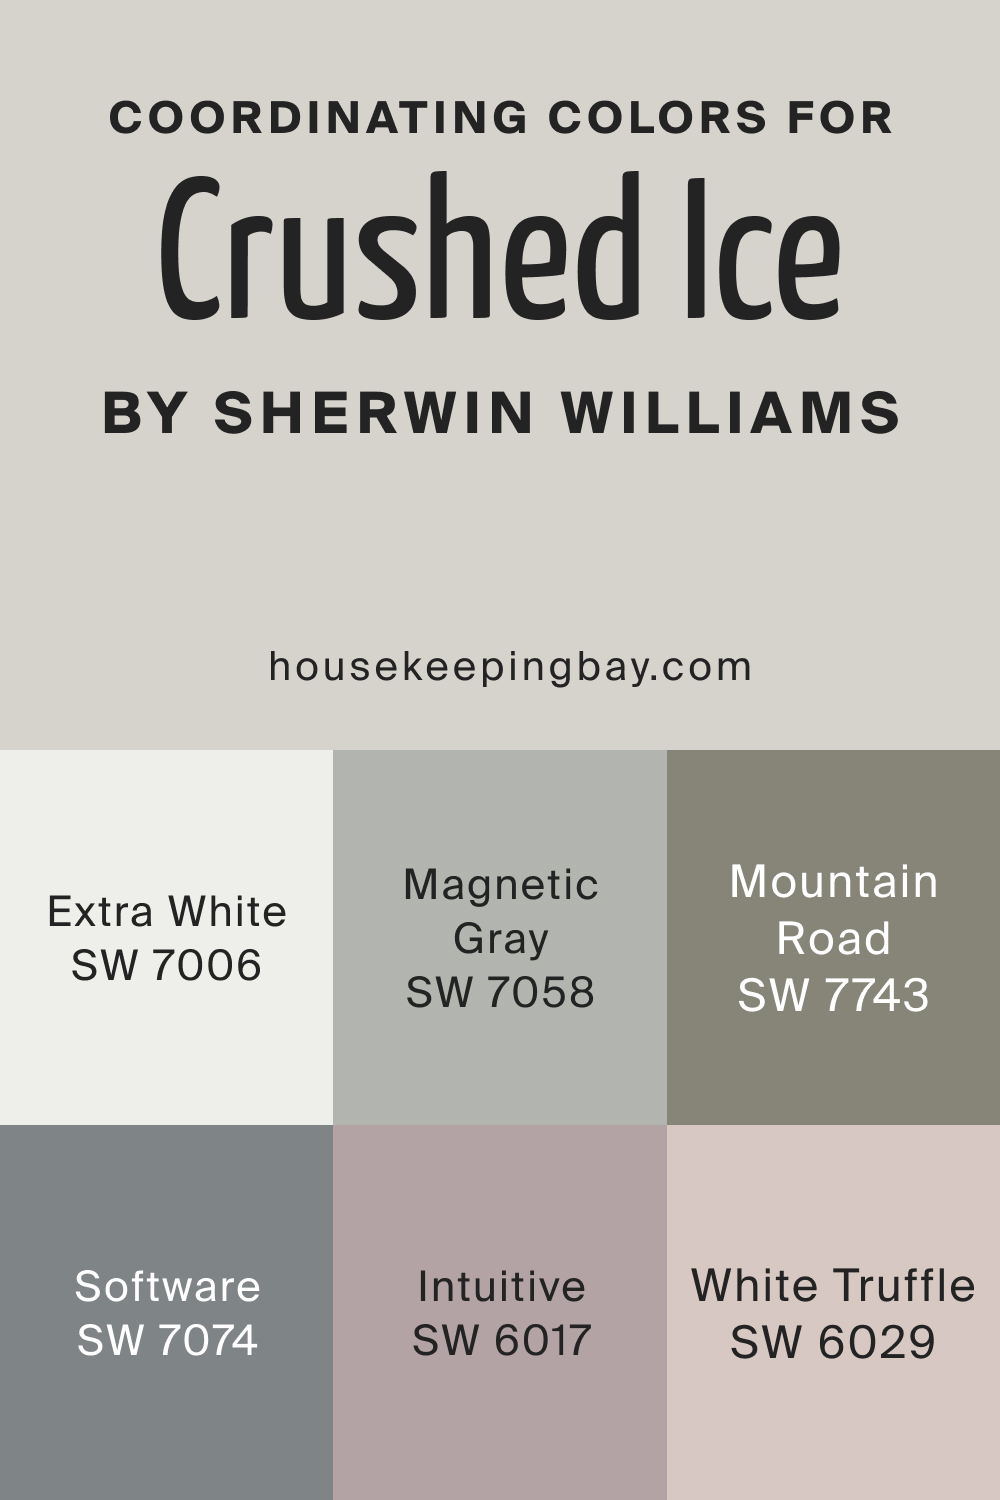 Coordinating Colors for Crushed Ice SW 7647 by Sherwin Williams